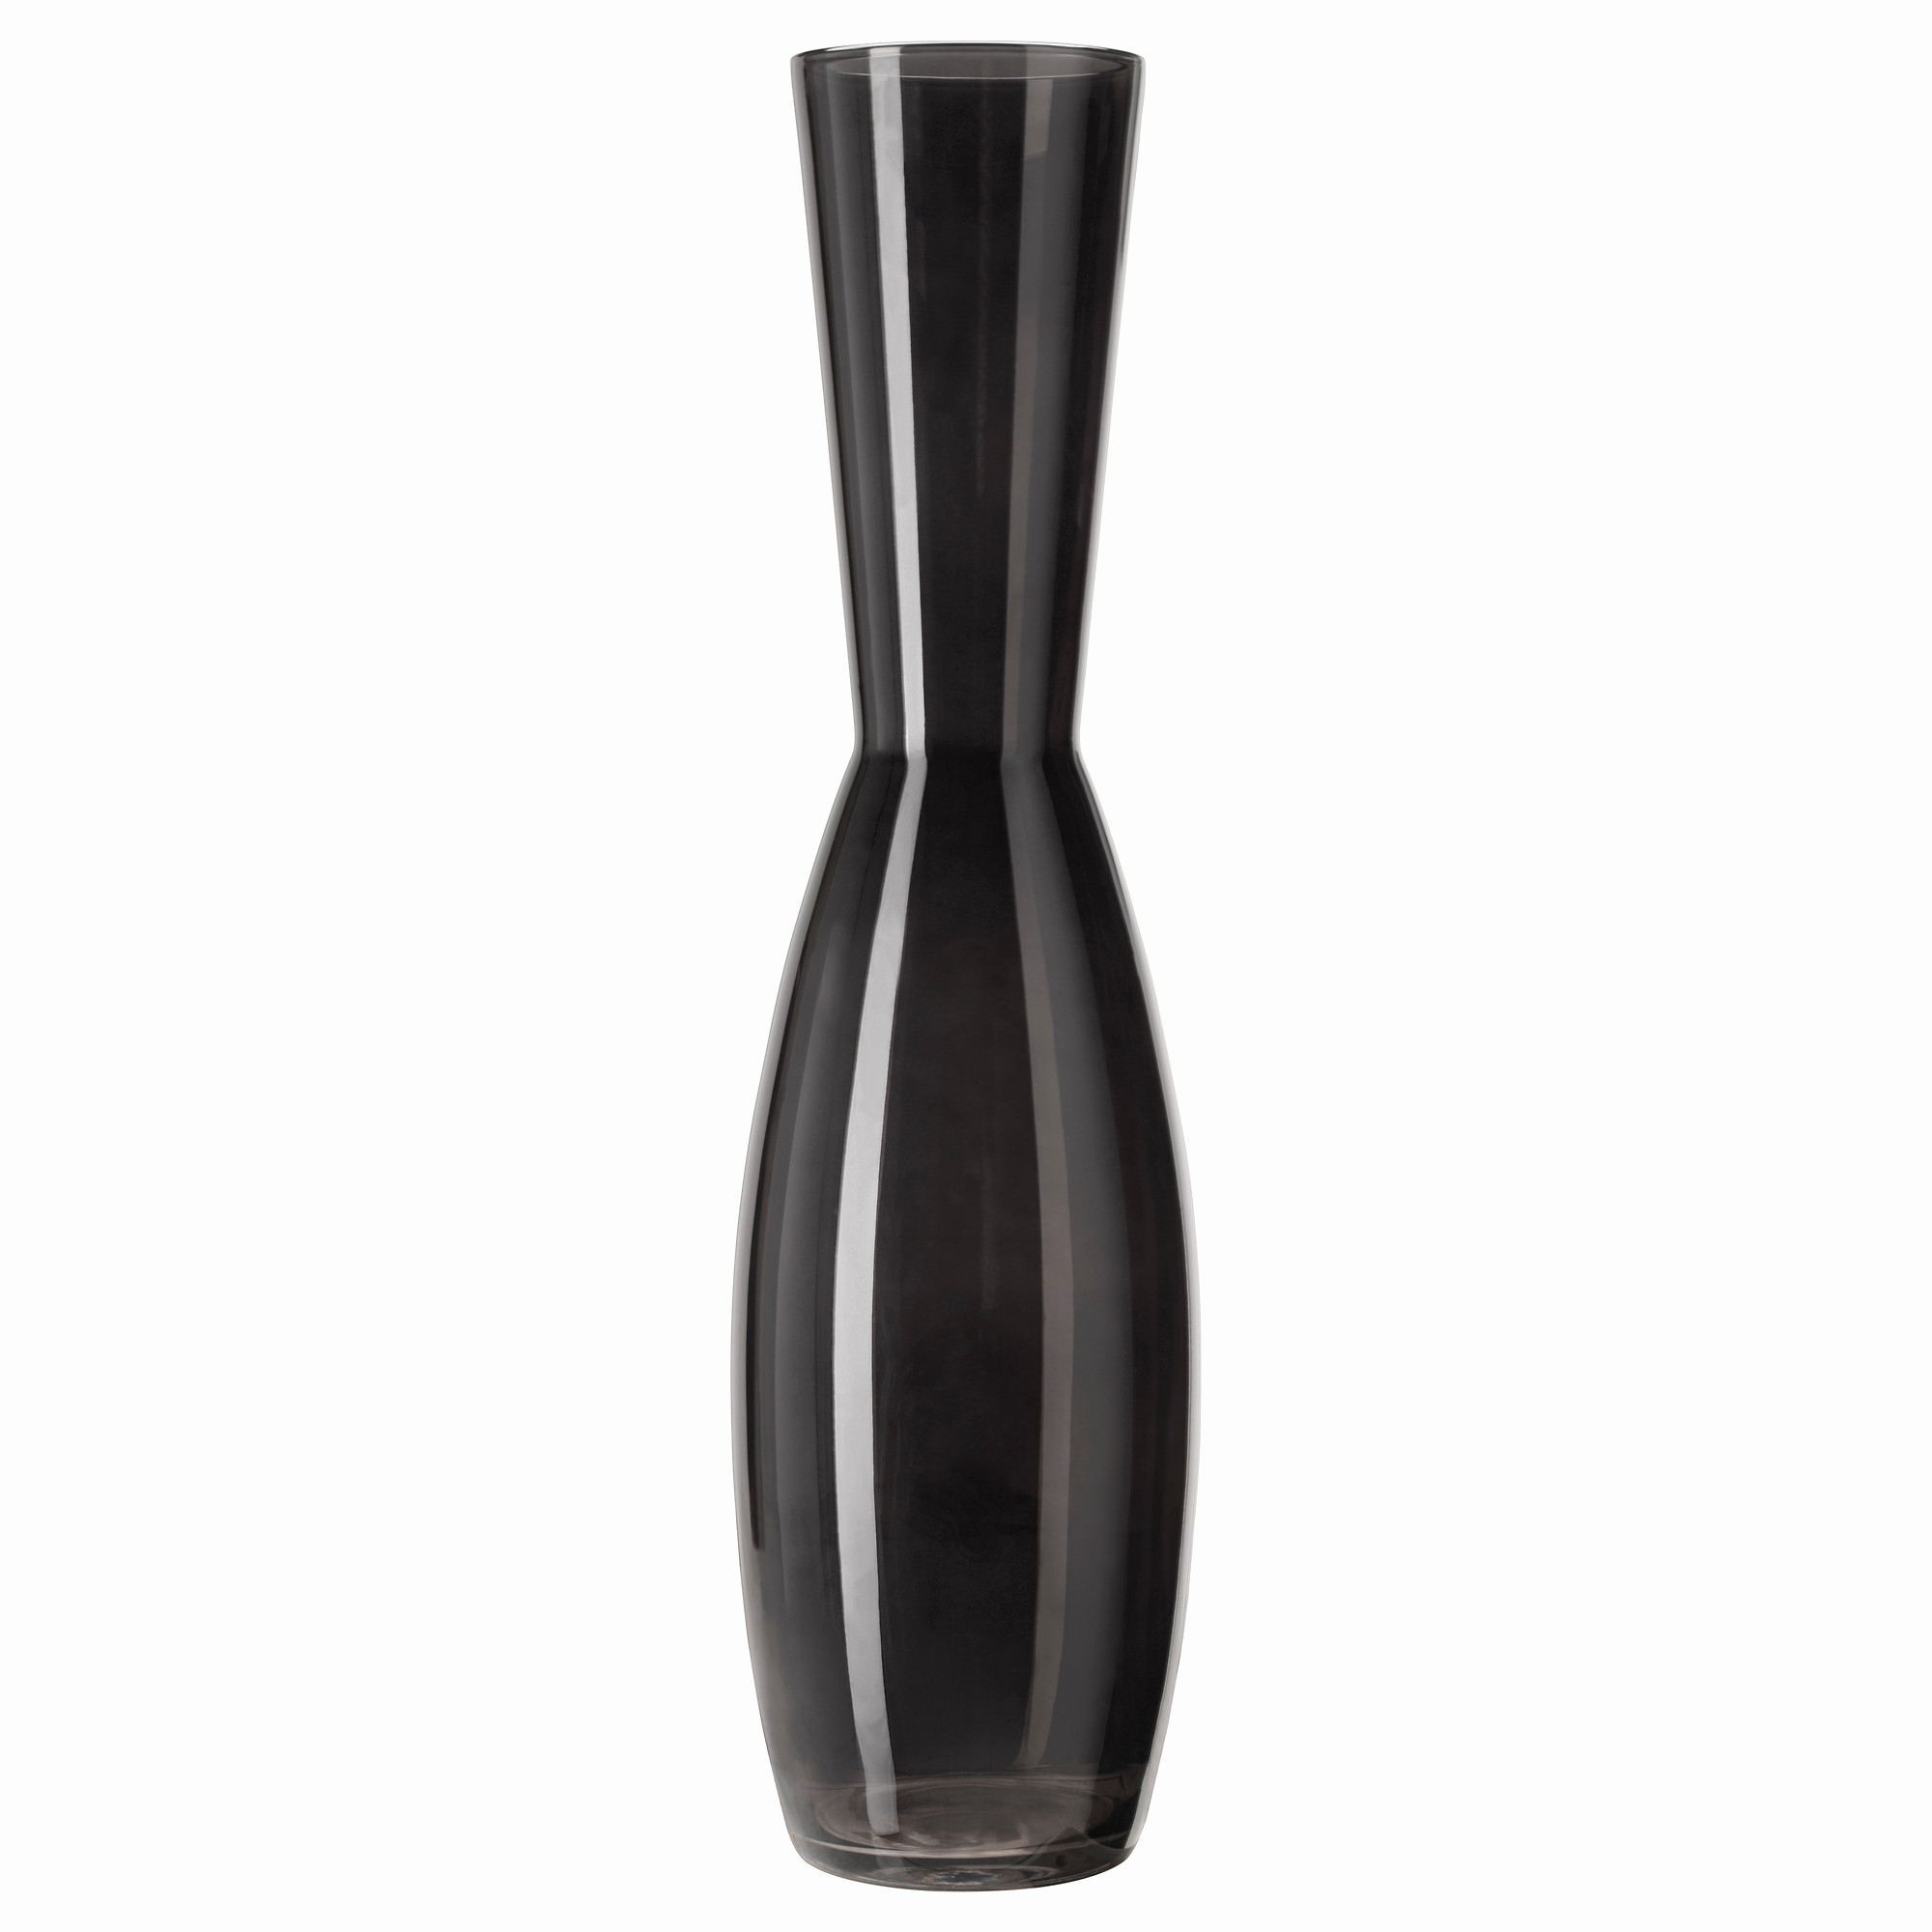 10 attractive Ikea Glass Floor Vase 2024 free download ikea glass floor vase of floor vase lovely ikea krabb mirror ideas awesome pe s5h vases ikea throughout floor vase lovely ikea krabb mirror ideas awesome pe s5h vases ikea floor vase i 0d